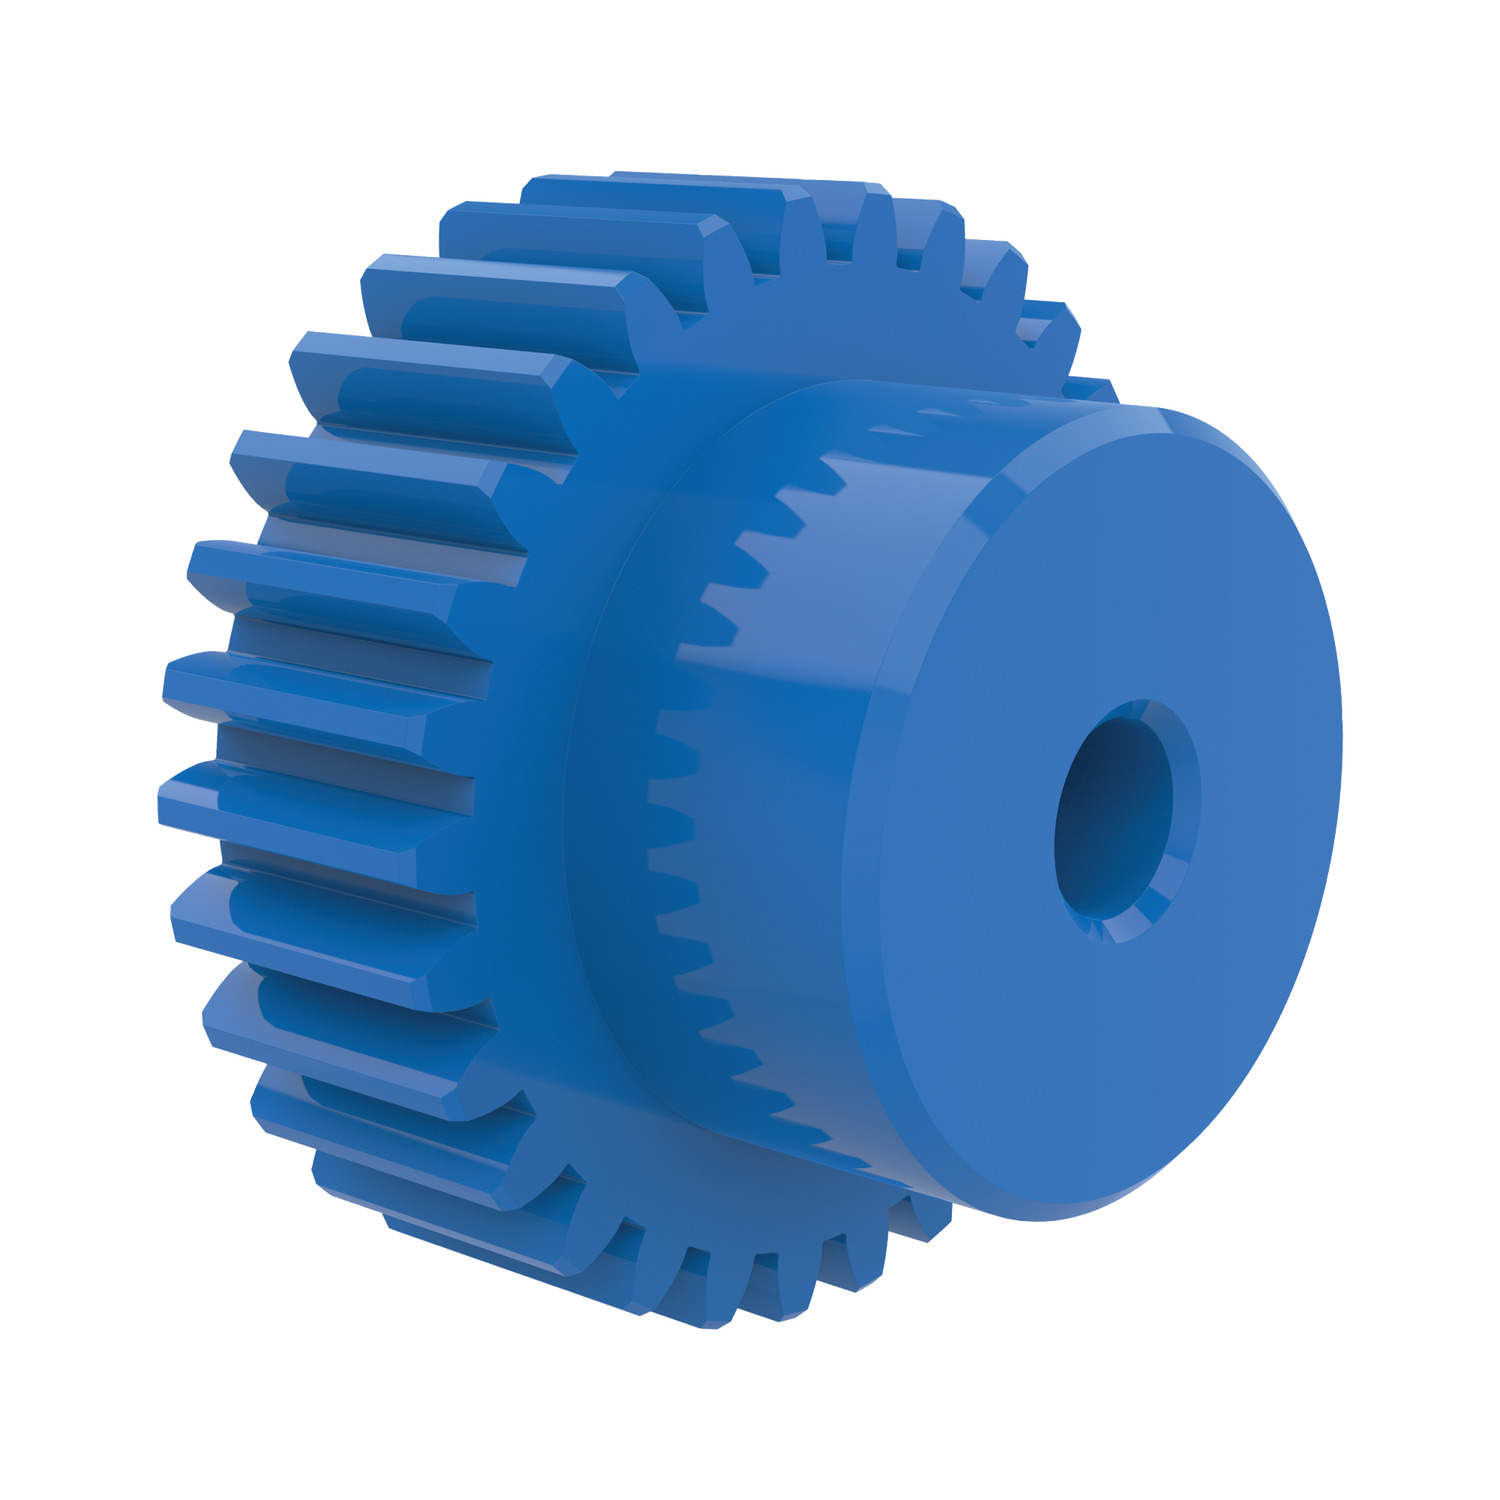 Spur Gears - Module 1.5 - Plastic Blue plastic spur gears for use in the food and drinks industries. The blue colour is easily picked up by food scanning machines. Approved for use in the USA, UK, EU, Japan, France and Canada.